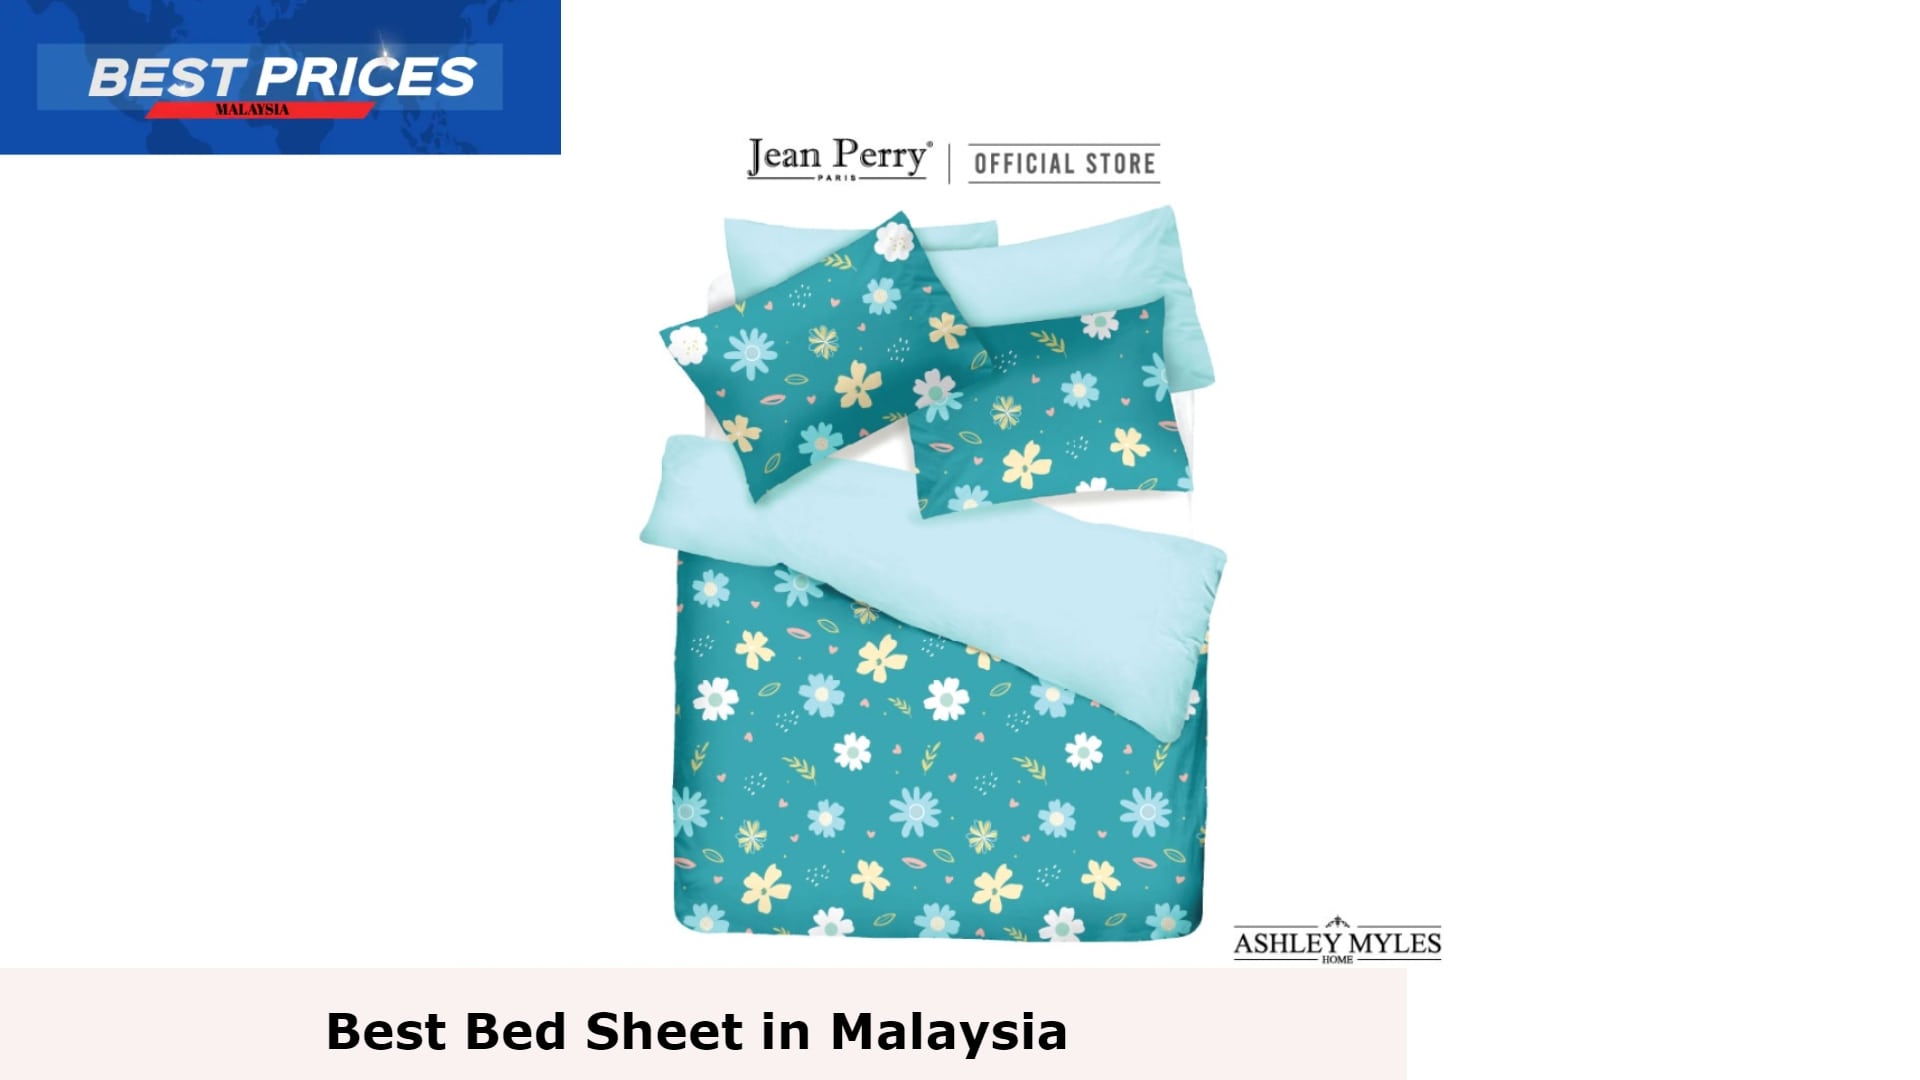 ASHLEY MYLES Moment 4-IN-1 Queen Fitted bed sheet Set - Bed Sheet Malaysia - Bed Sheet Malaysia, ELLE DECOR Aspira Basic Supreme High Quality 4 In 1 Bed Sheet Fitted Set 650 TC - Bed Sheet Malaysia